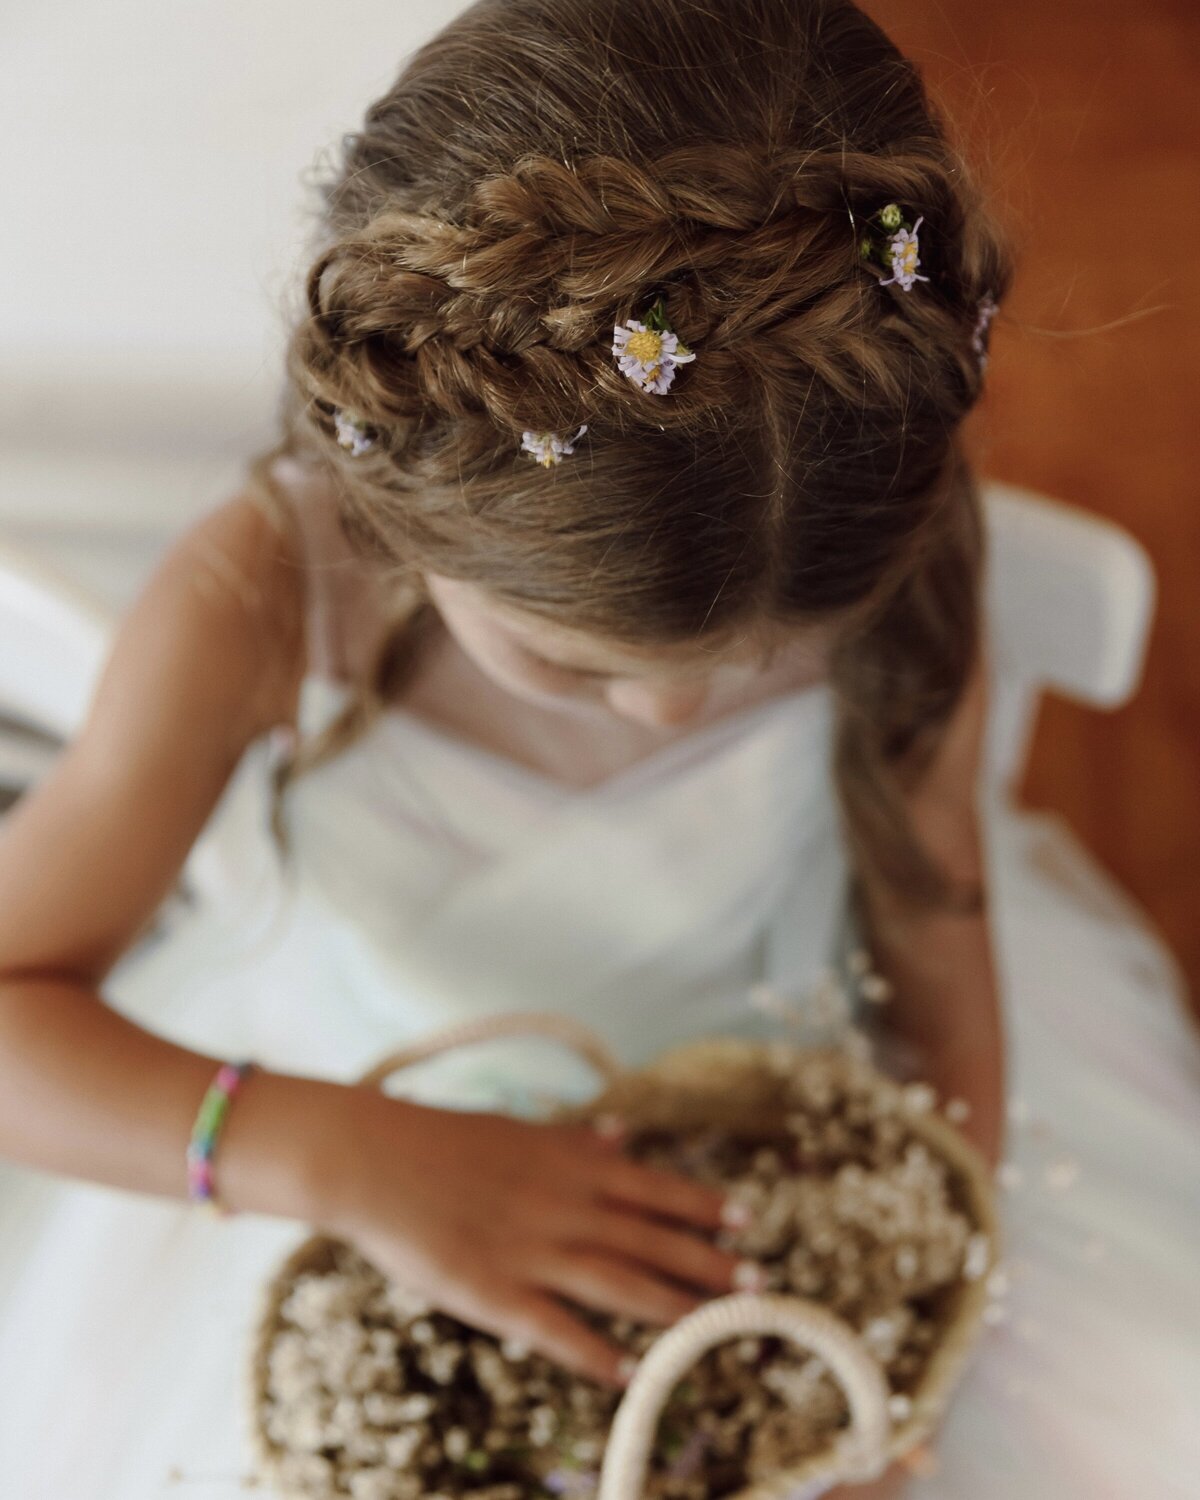 Crows nest wedding flower girl hair with braids and flowers